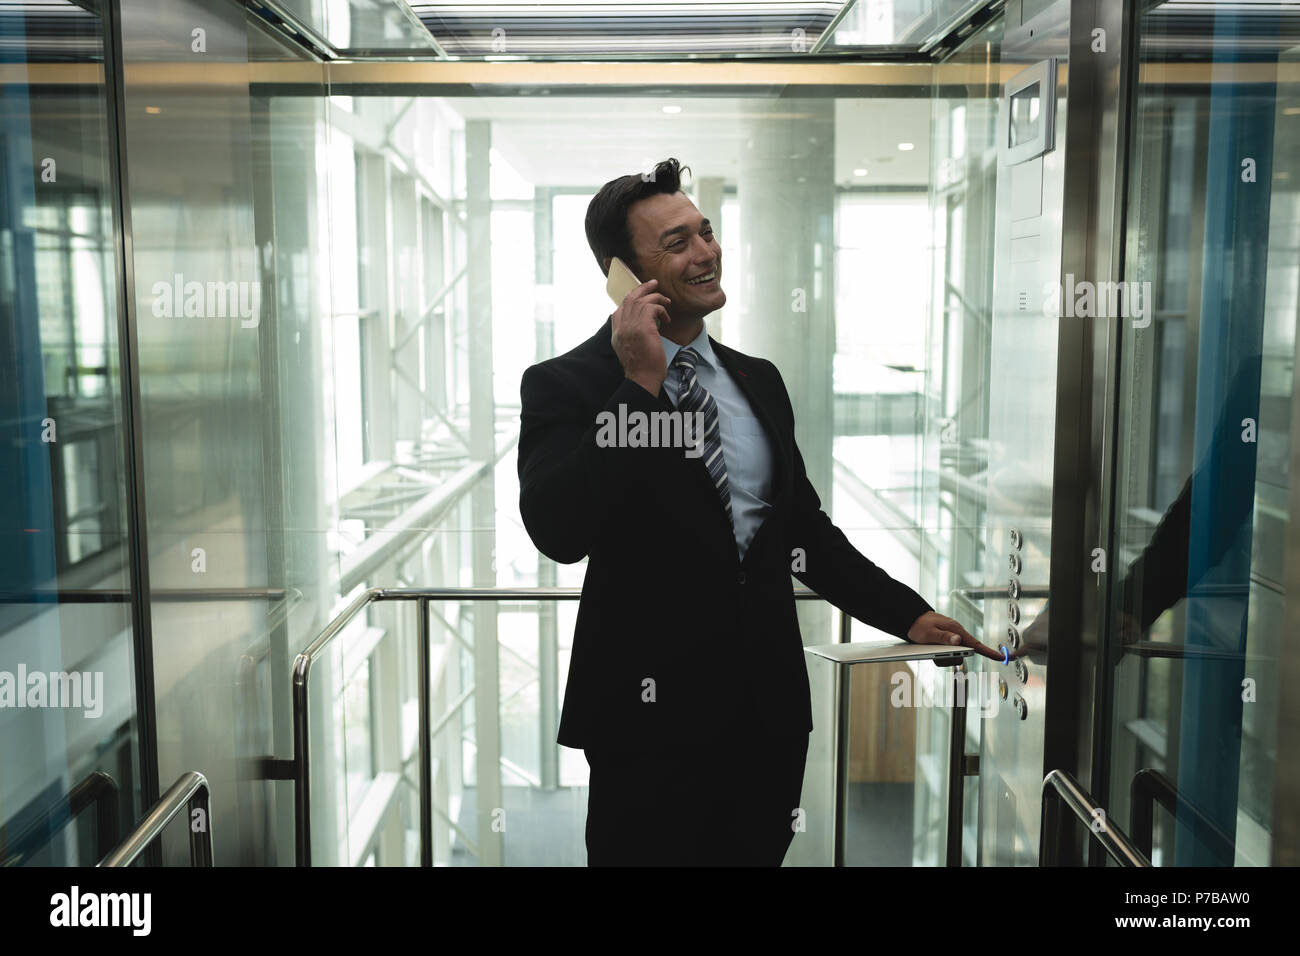 Businessman talking on the phone in elevator Stock Photo